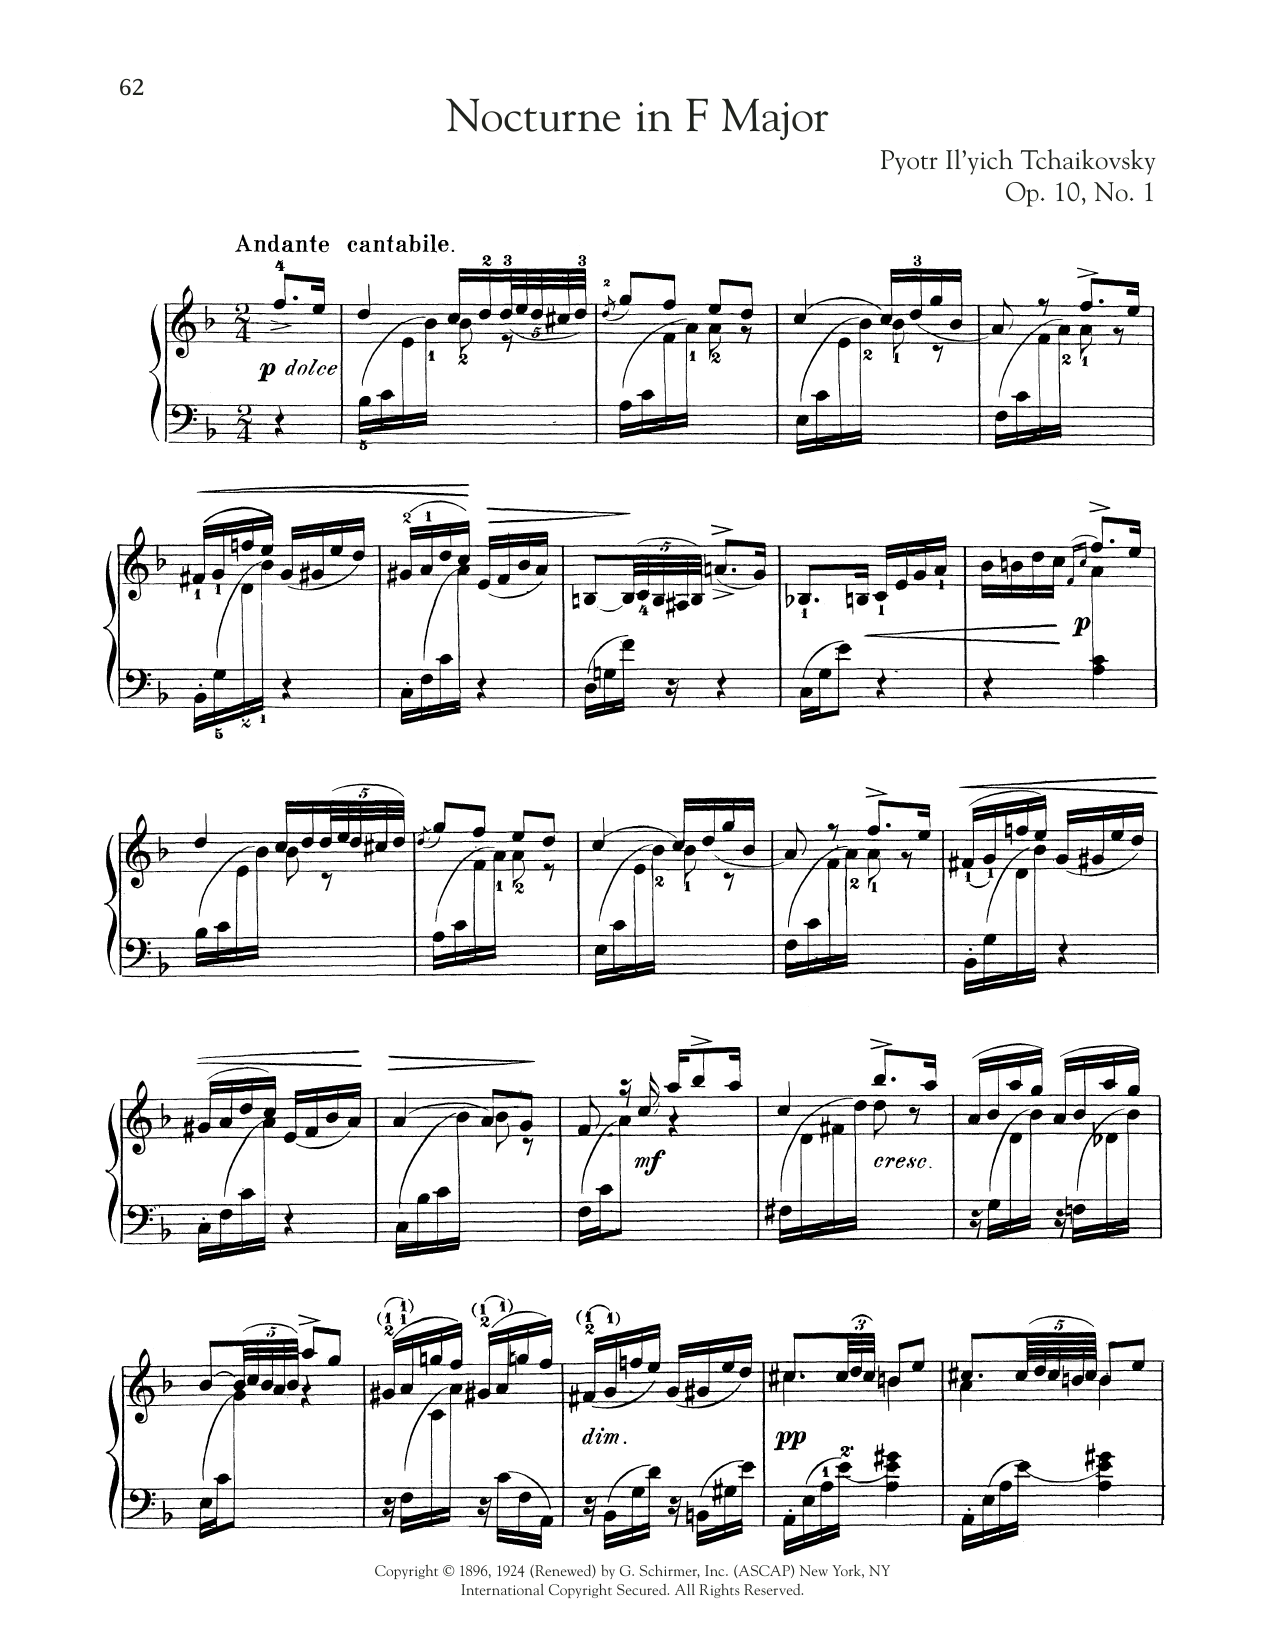 Pyotr Il'yich Tchaikovsky Nocturne, Op. 10, No. 1 sheet music preview music notes and score for Piano Solo including 4 page(s)